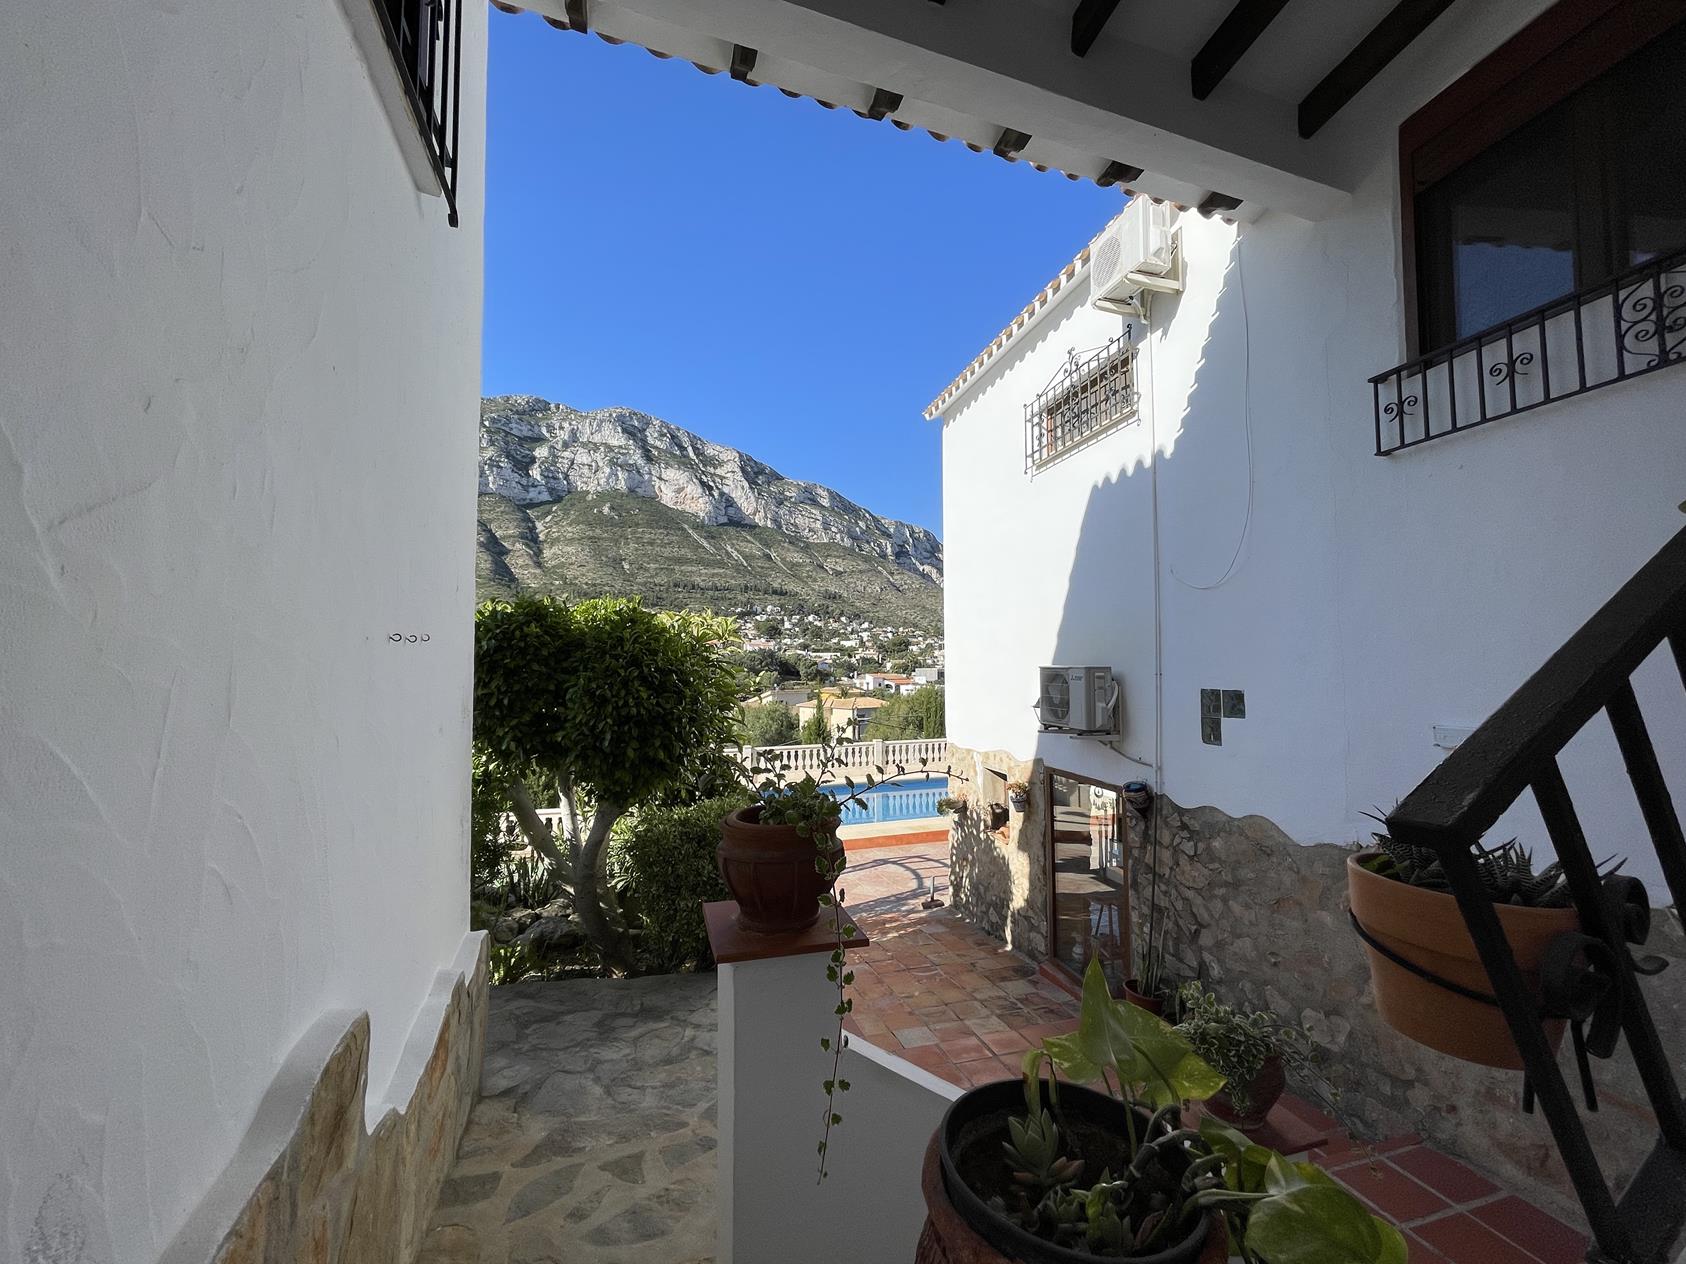 Villa with pool and view of the Montgó - Santa Lucía